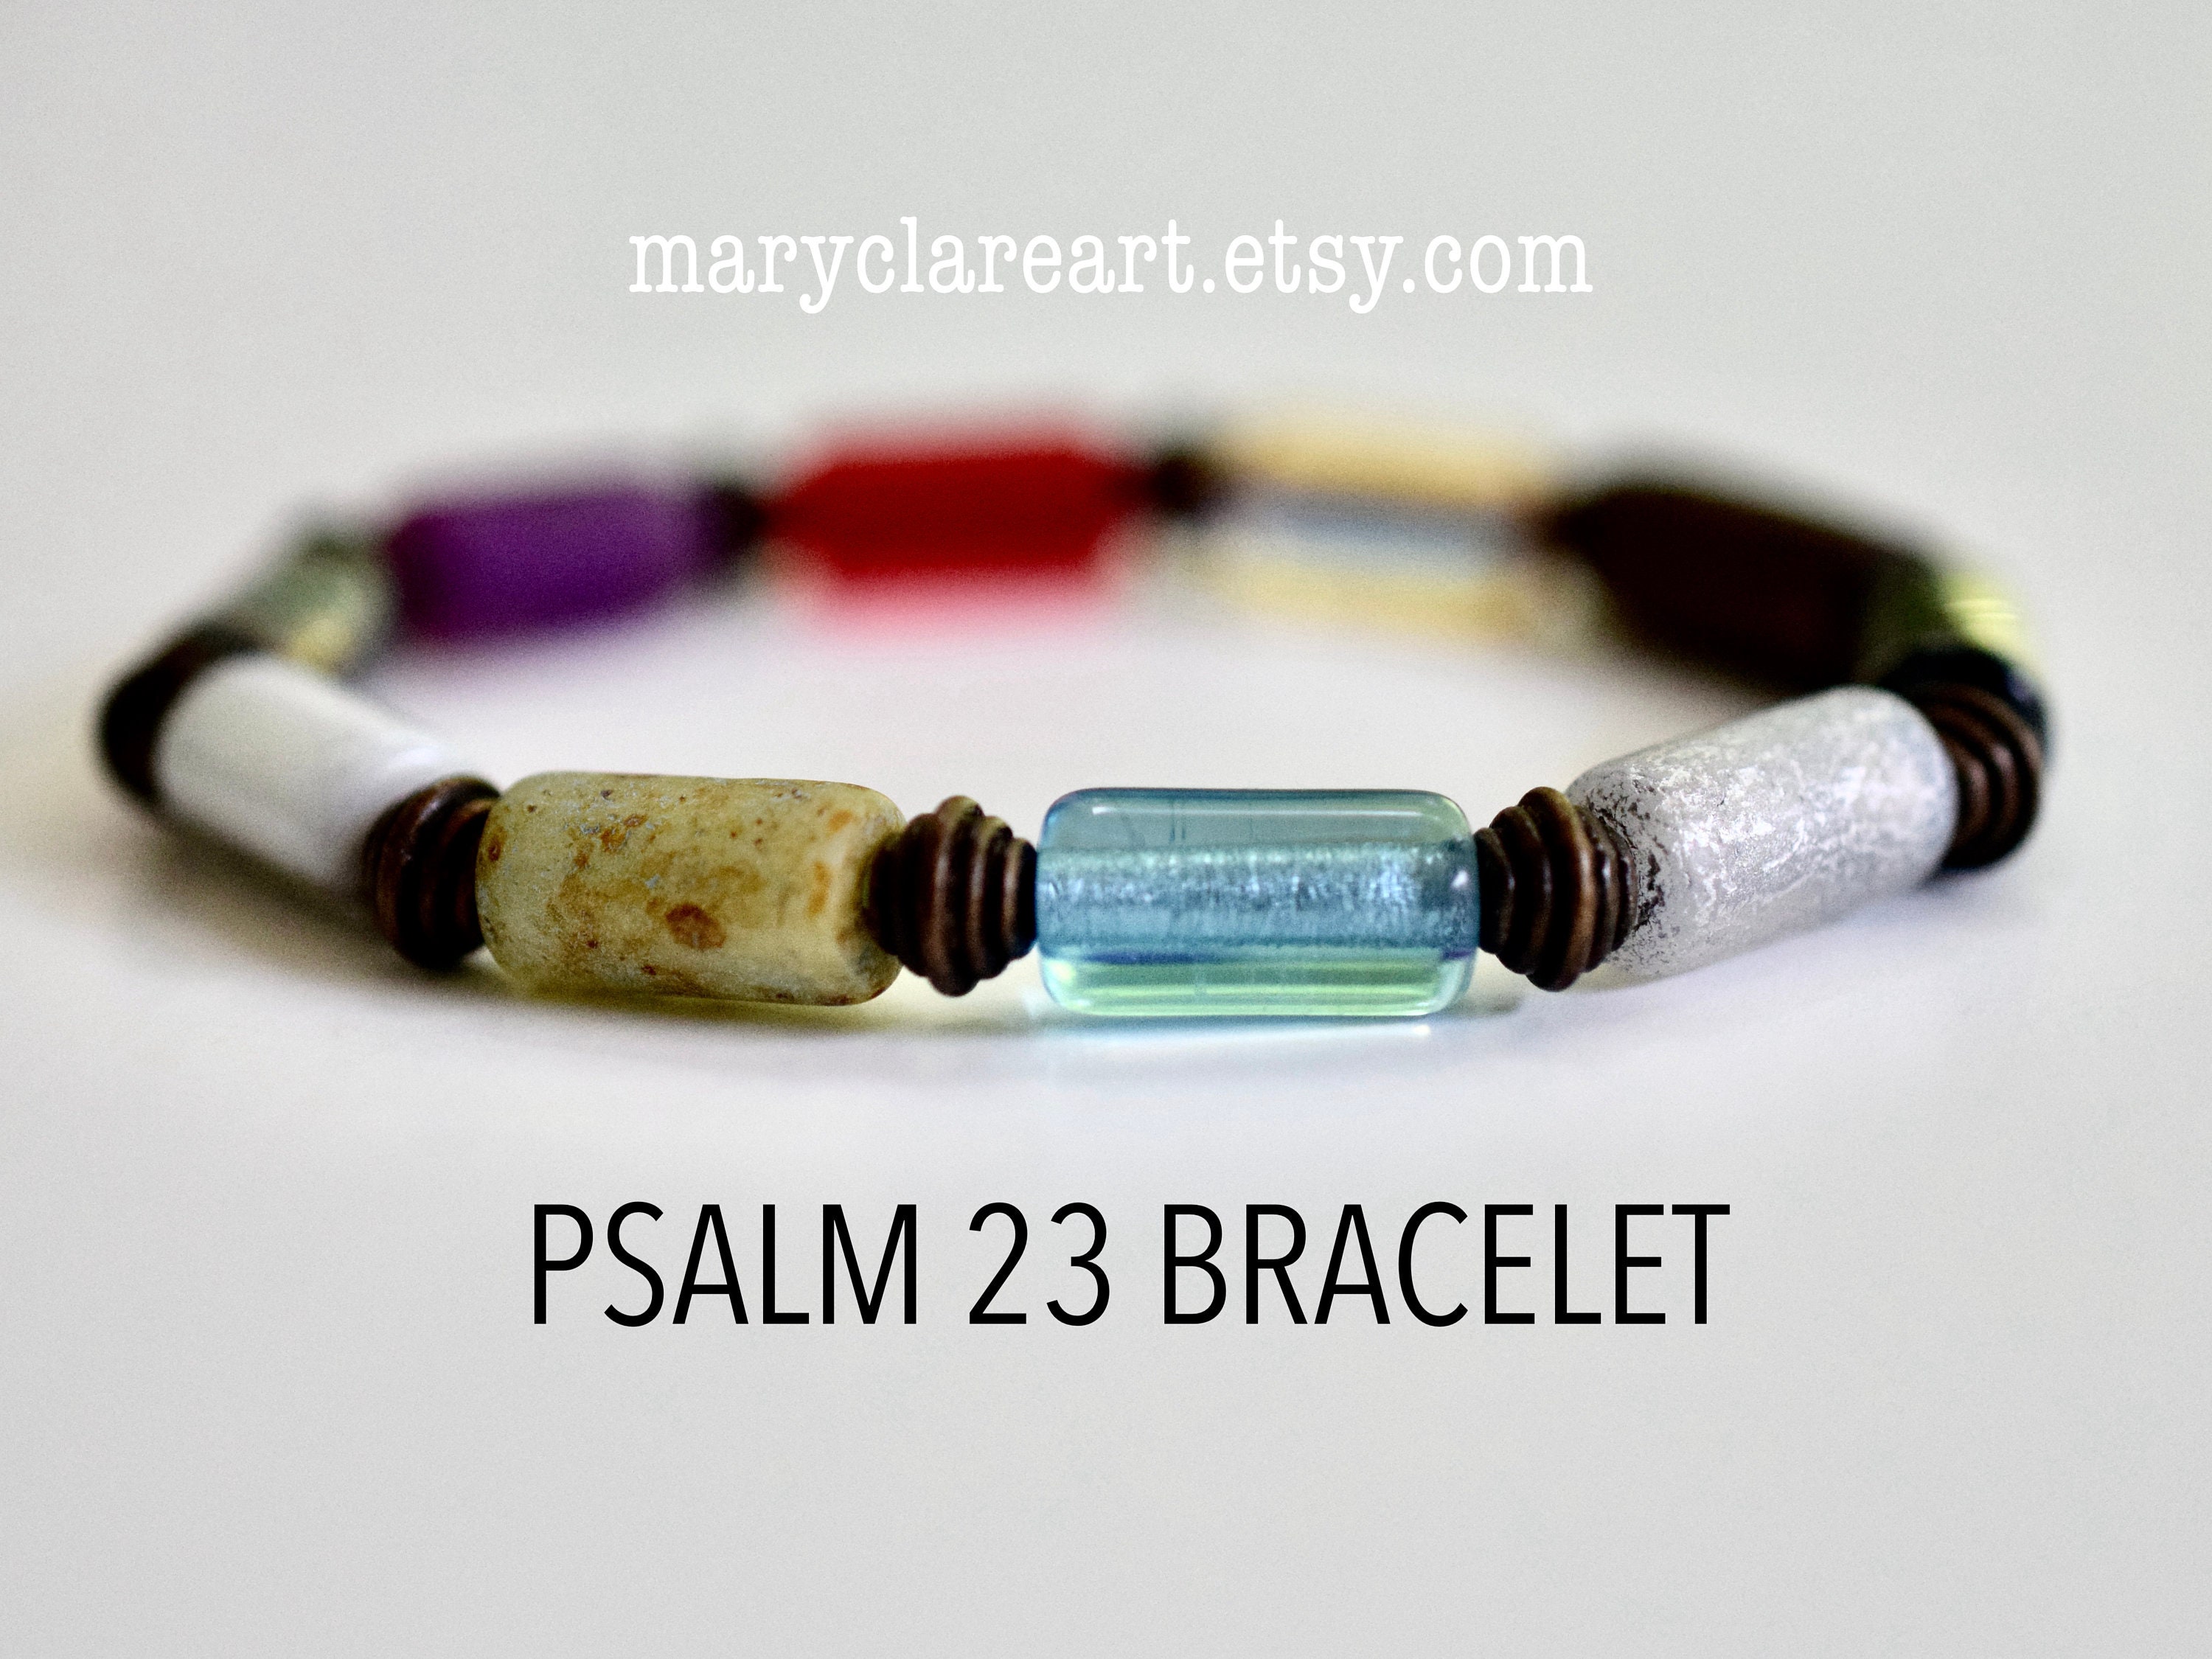 Miraculous Medal Bracelet, Catholic Religious Jewelry Gift (CHOOSE A COLOR)  | eBay